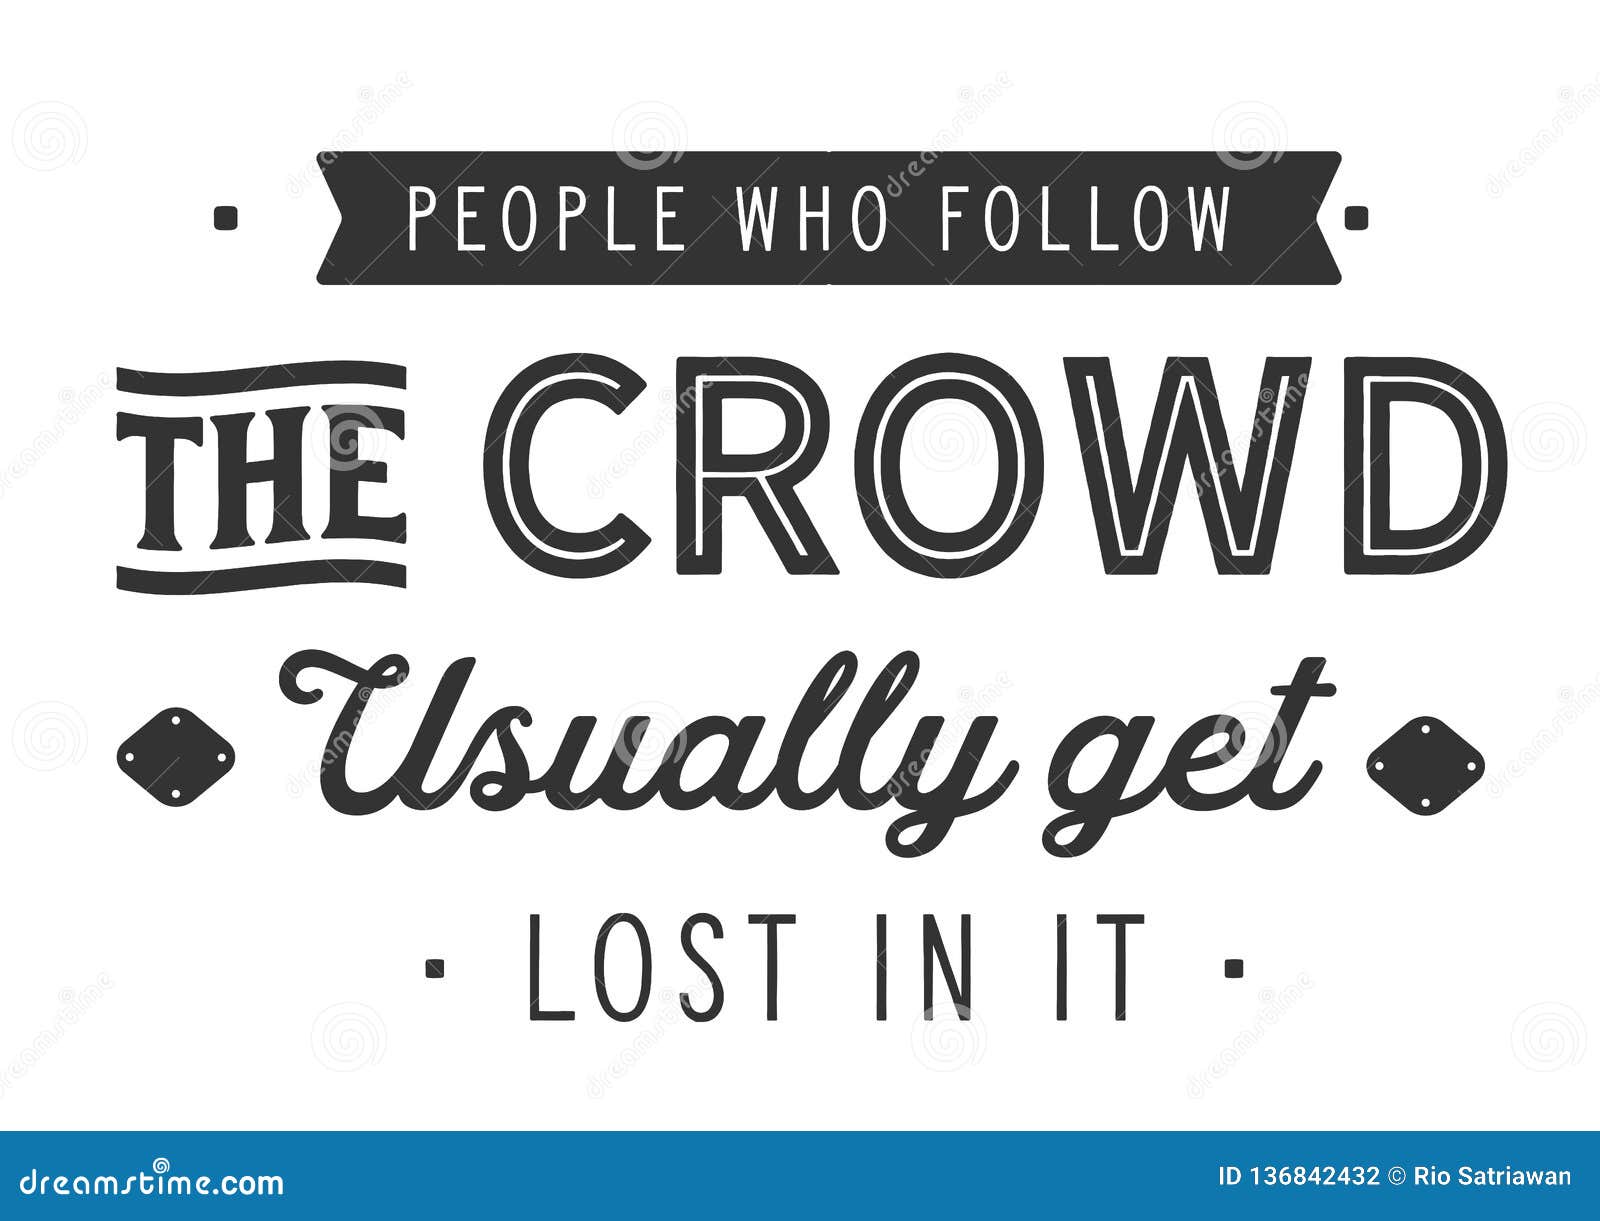 people who follow the crowd usually get lost in it